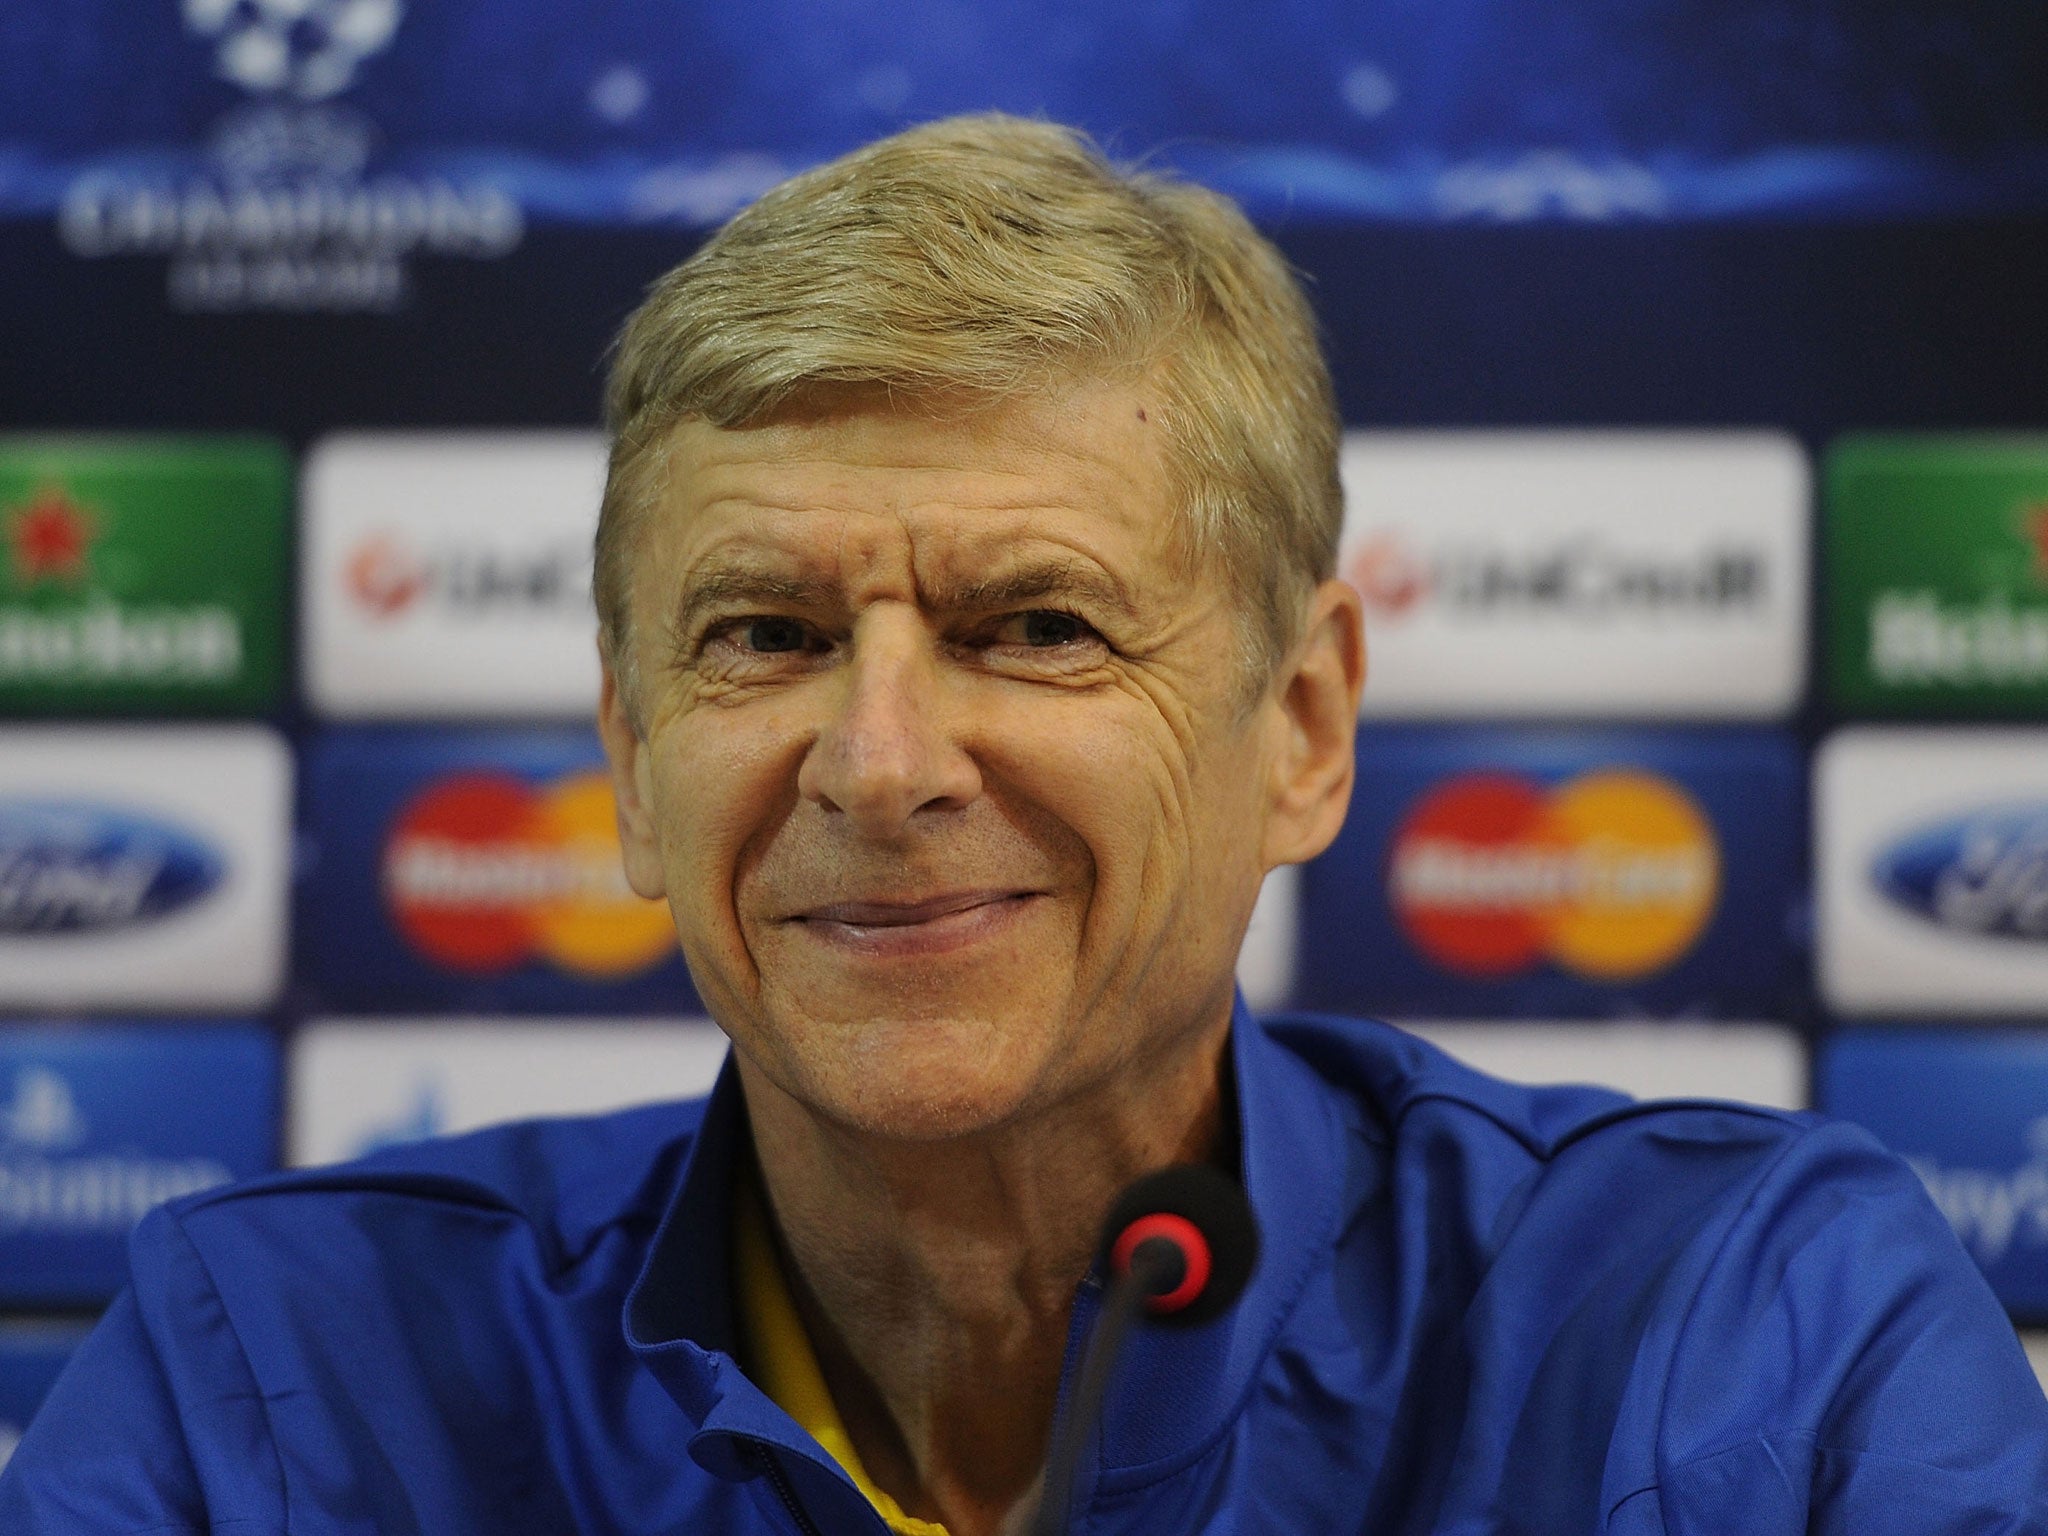 Arsenal manager Arsene Wenger feels stability in the side is more important that rotating his players